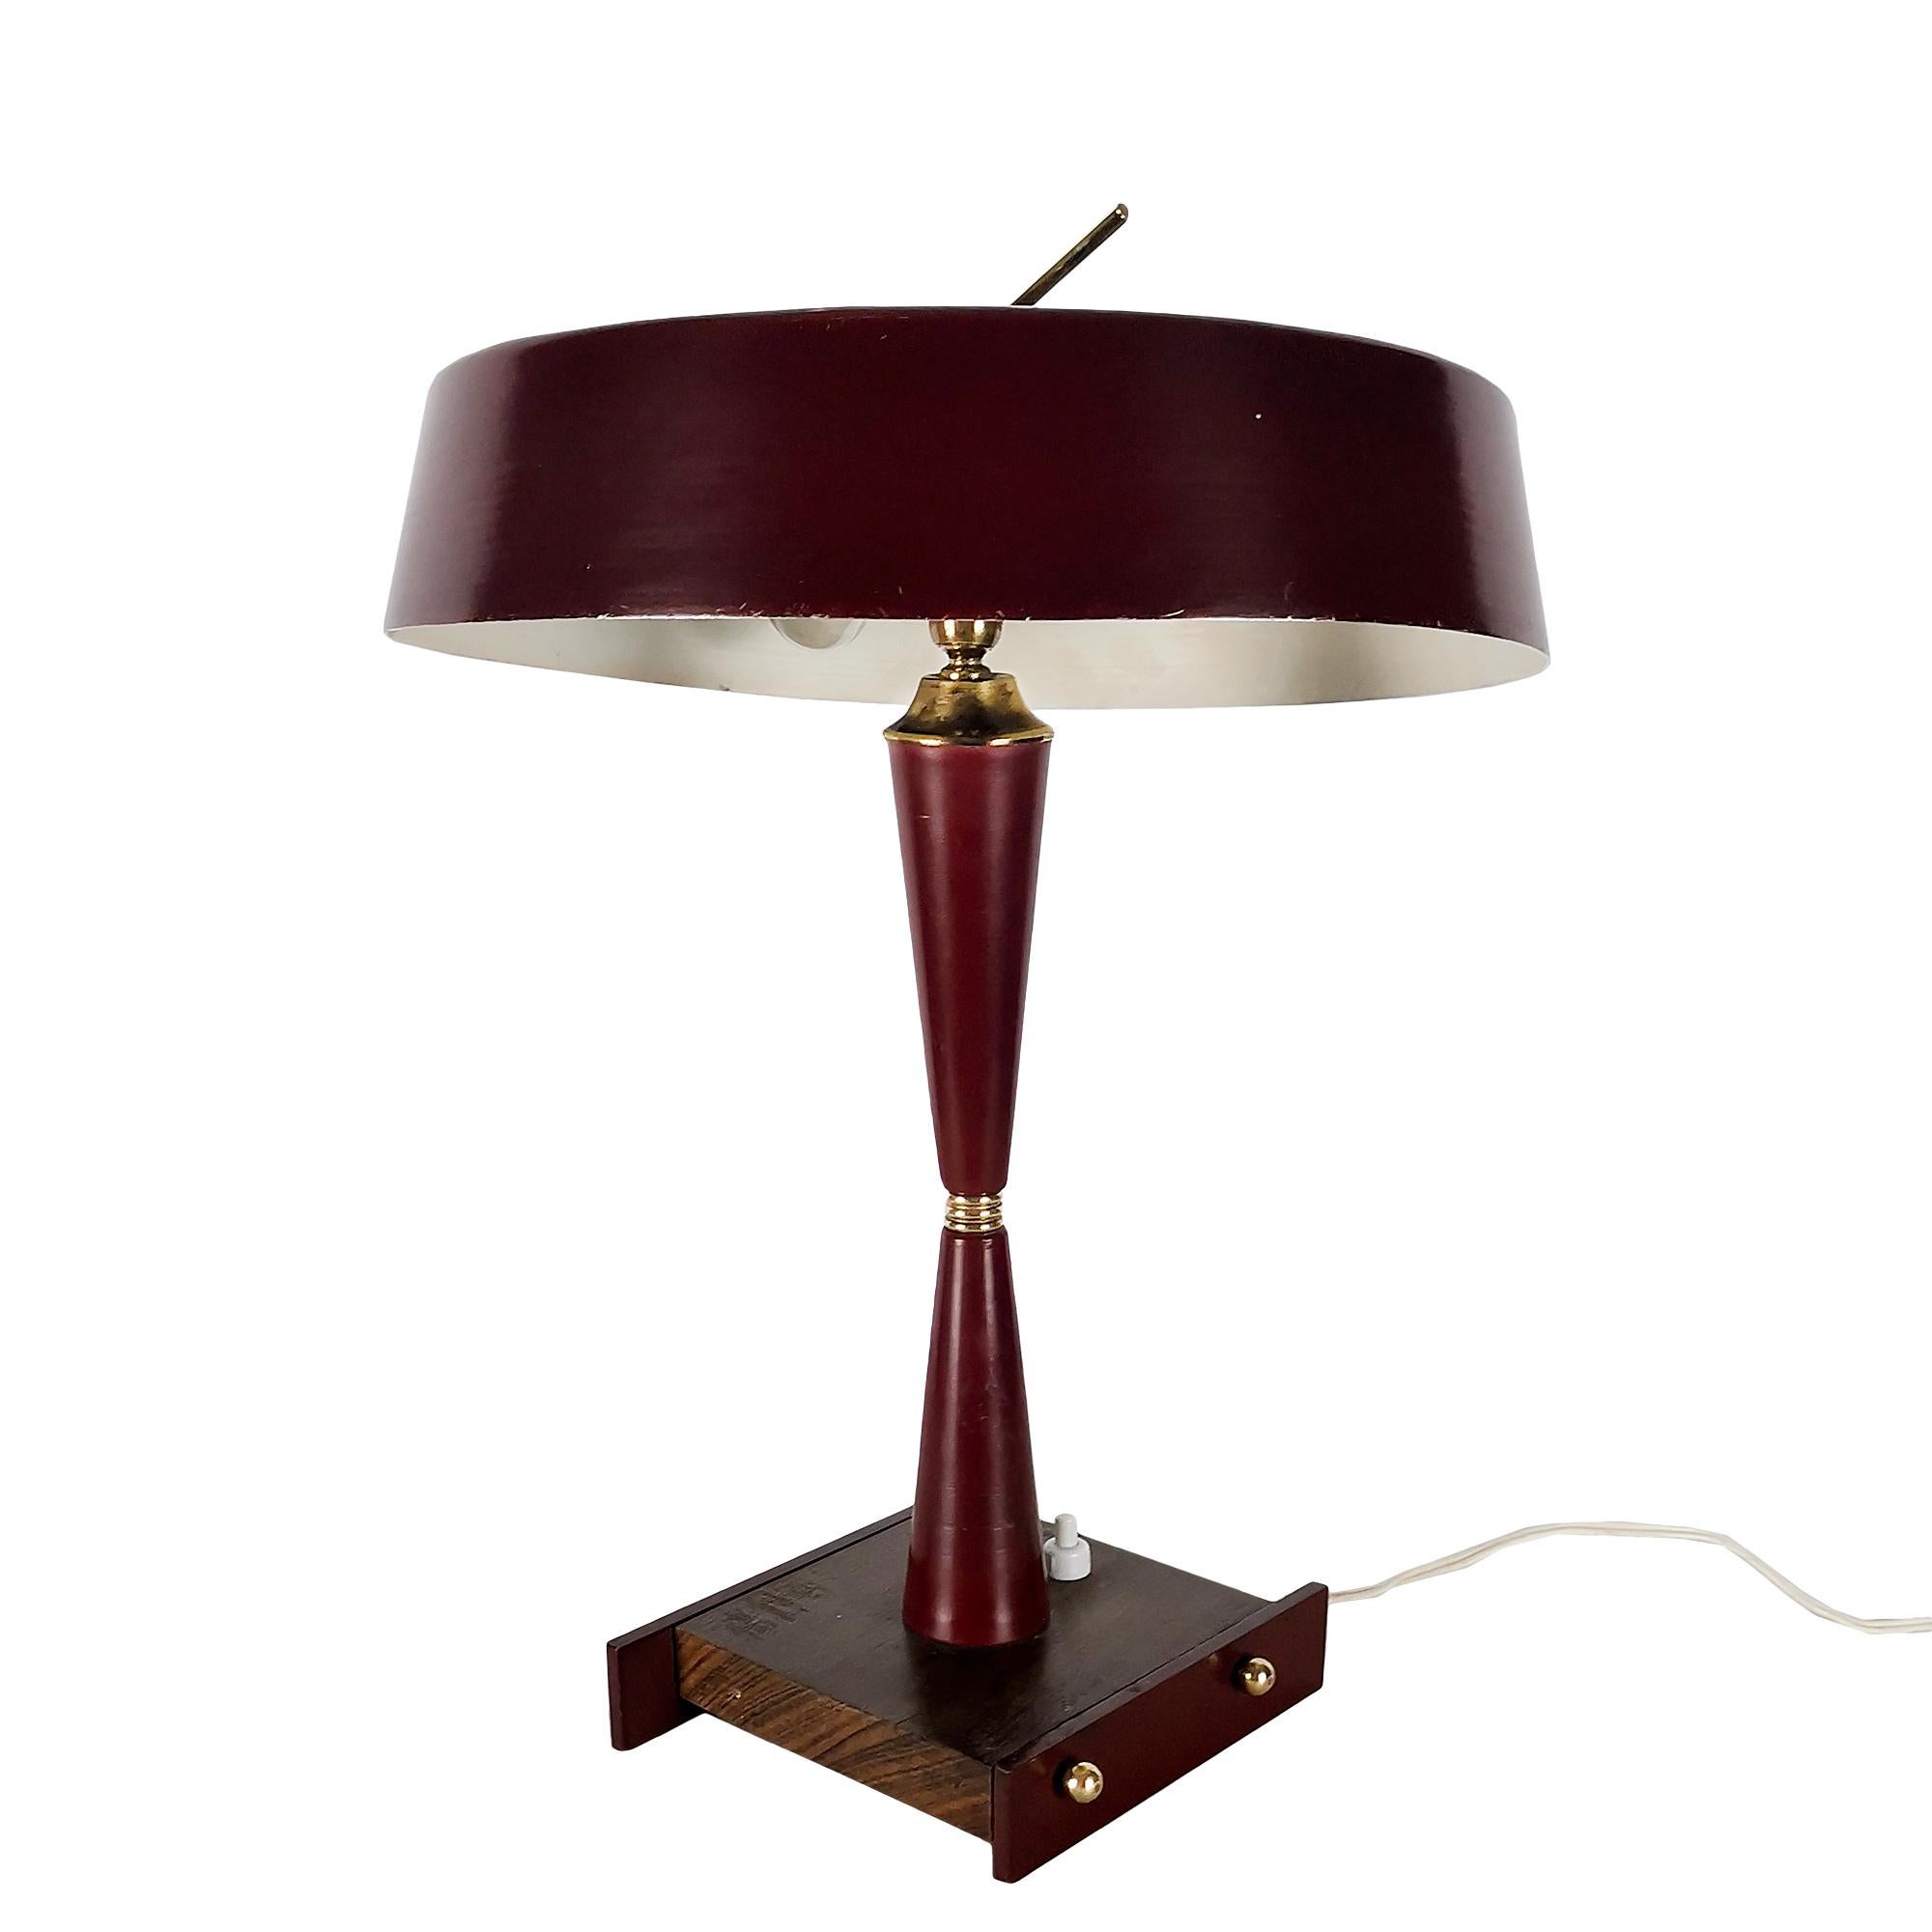 Polished Mid-Century Modern Table Lamp by Stilux In Burgundy Steel and Aluminium - Italy For Sale